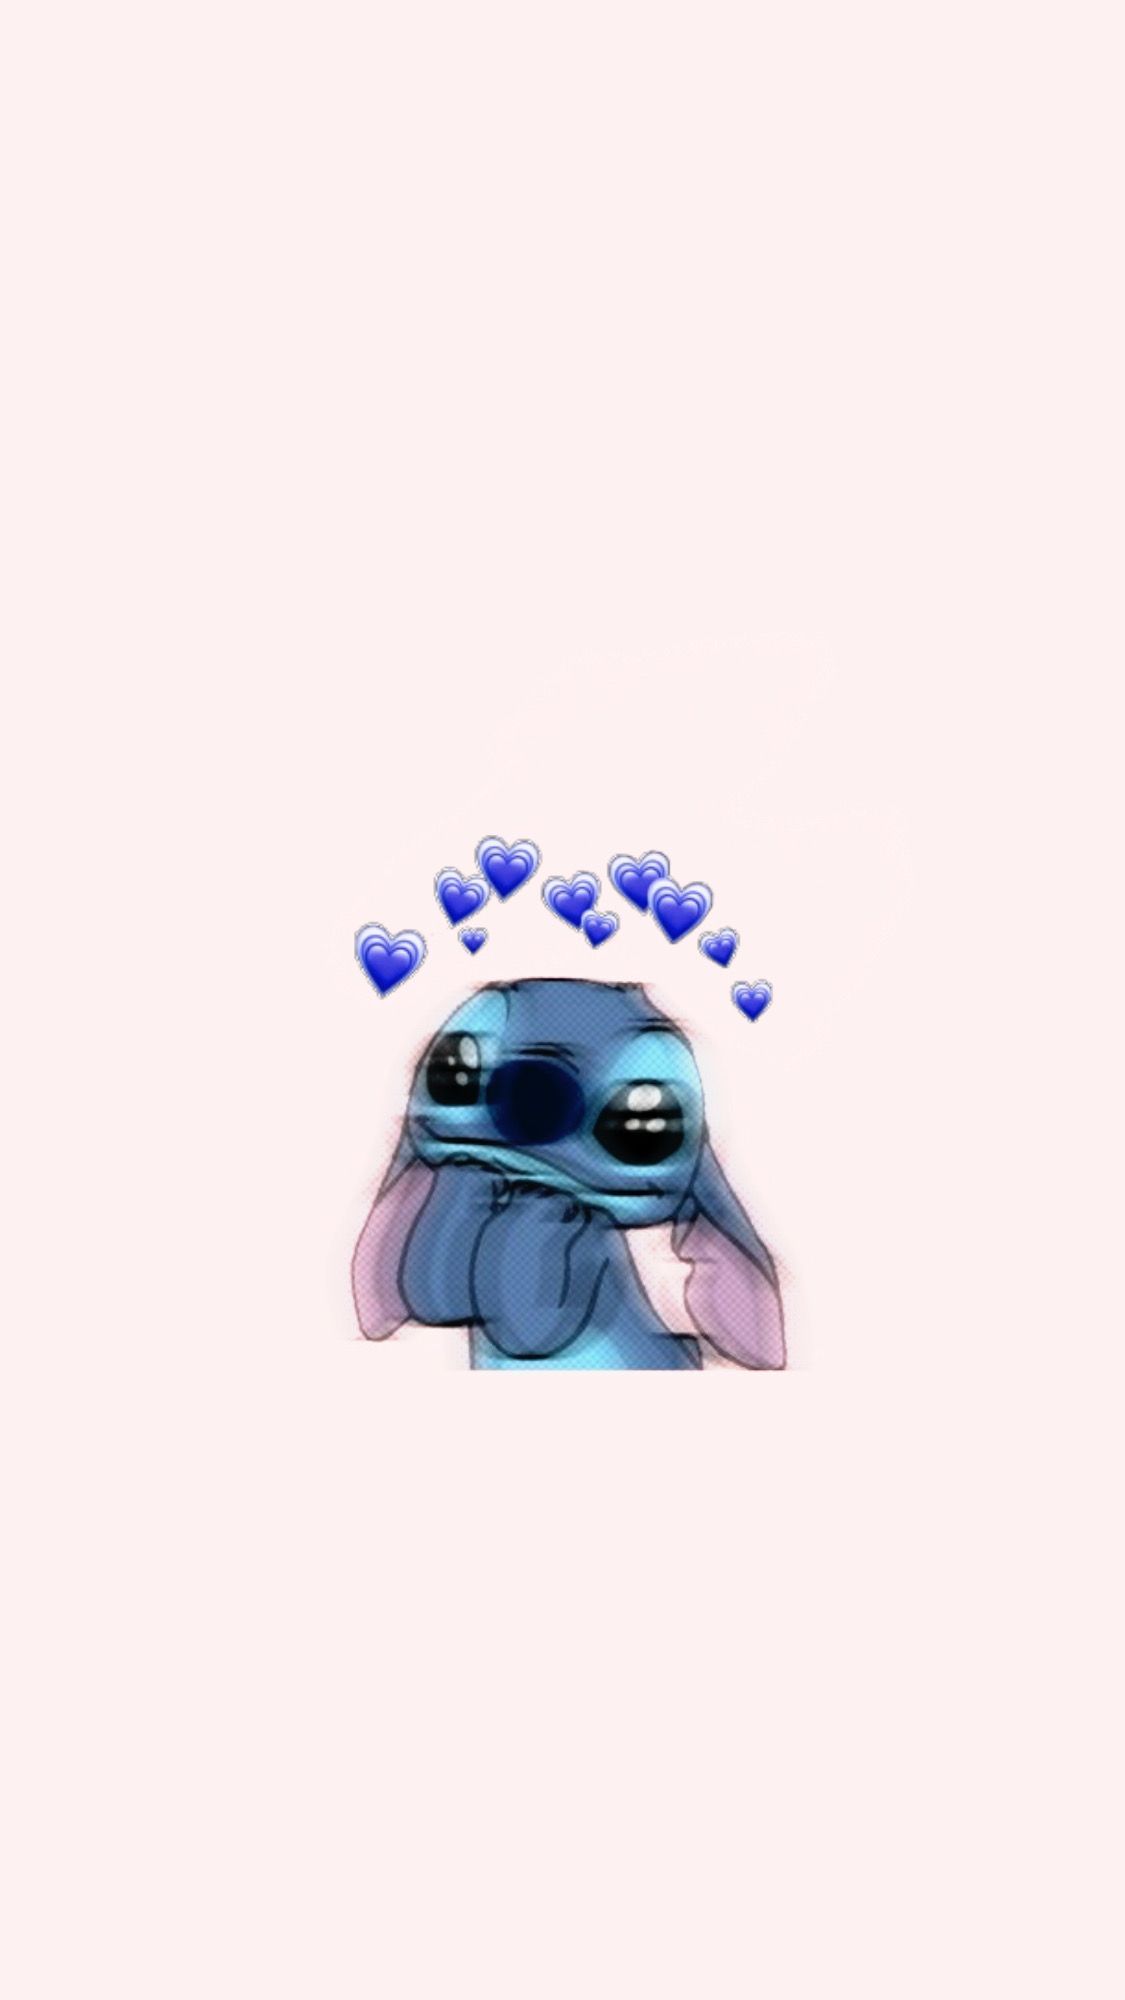 A stitch with hearts on his head - Cute, Stitch